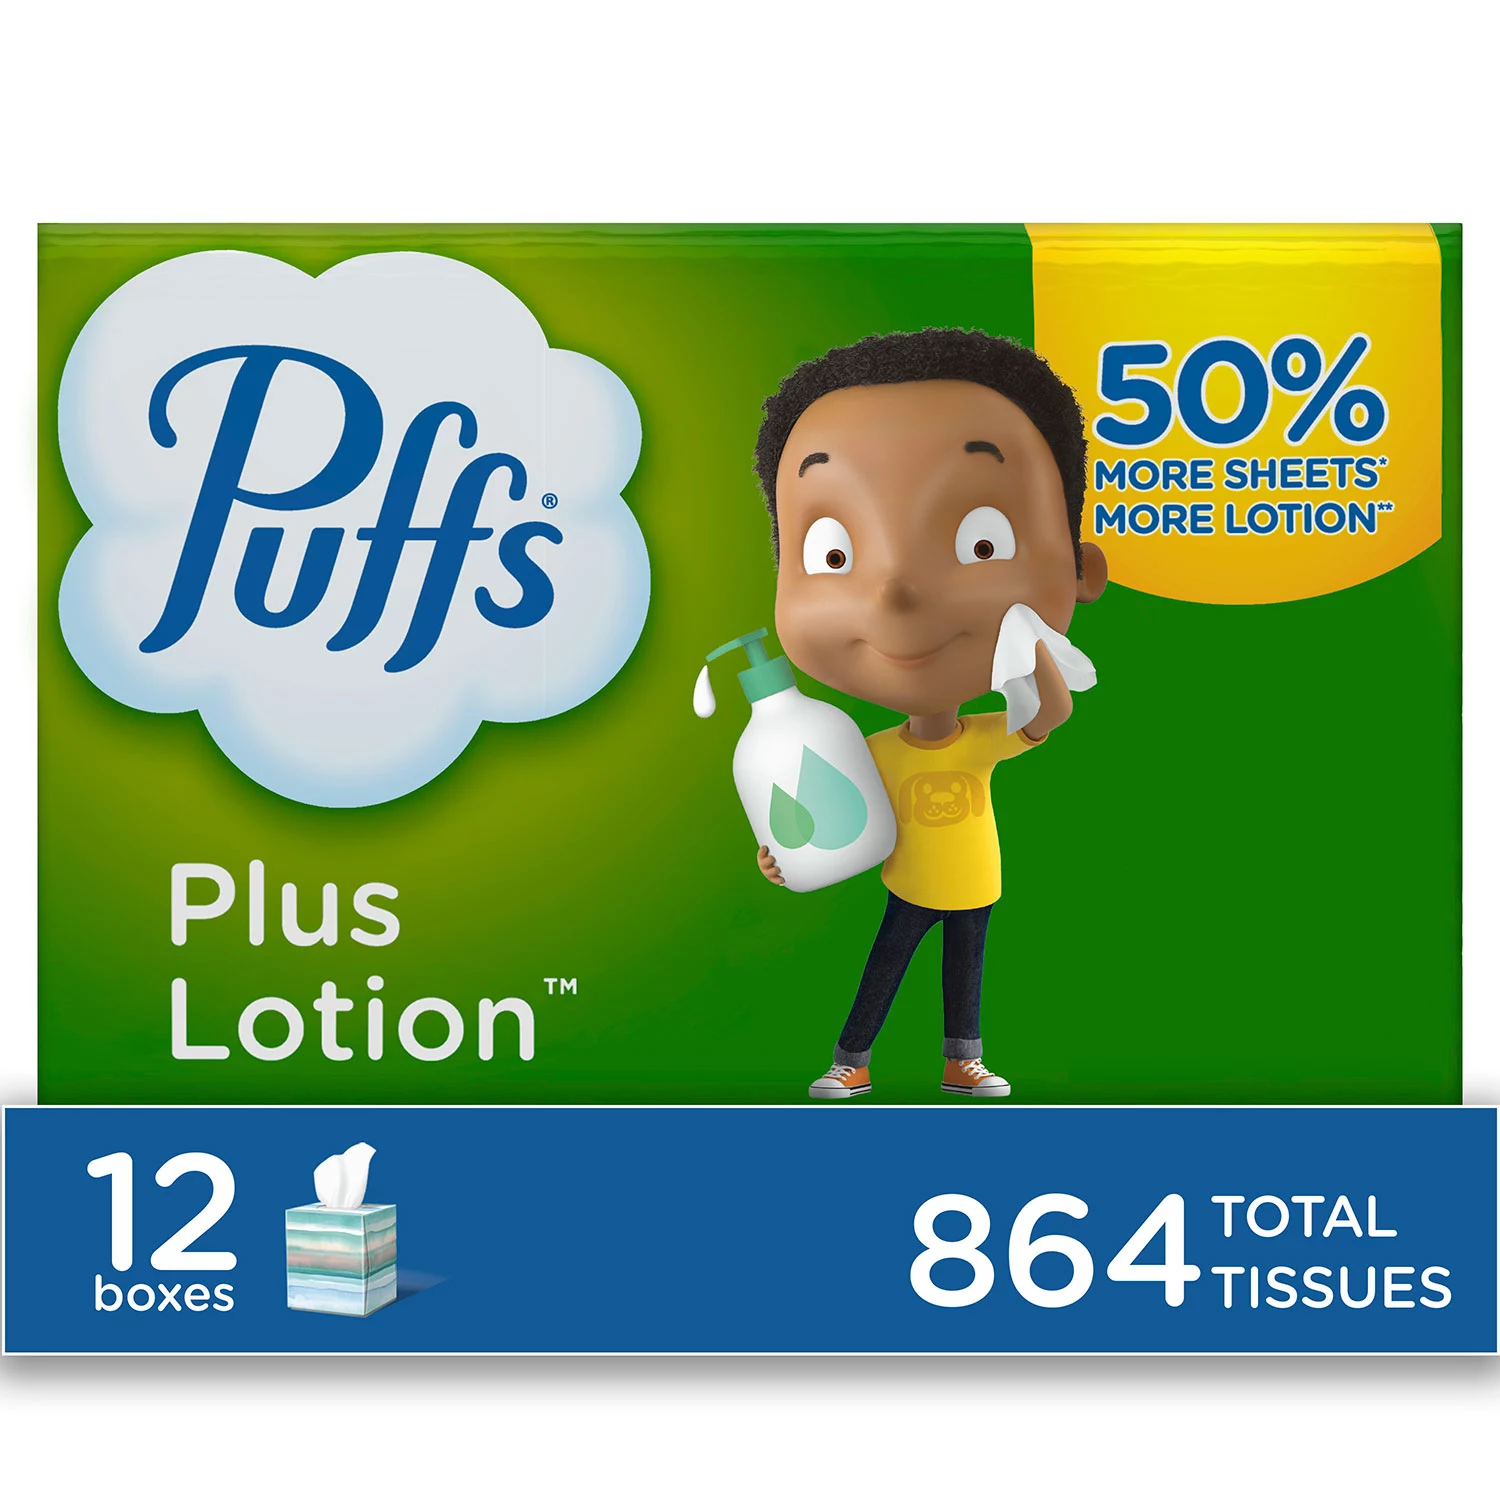 Buy from Fornaxmall.com- Puffs Plus Lotion Facial Tissues -12 mega cubes-864 Total Tissues